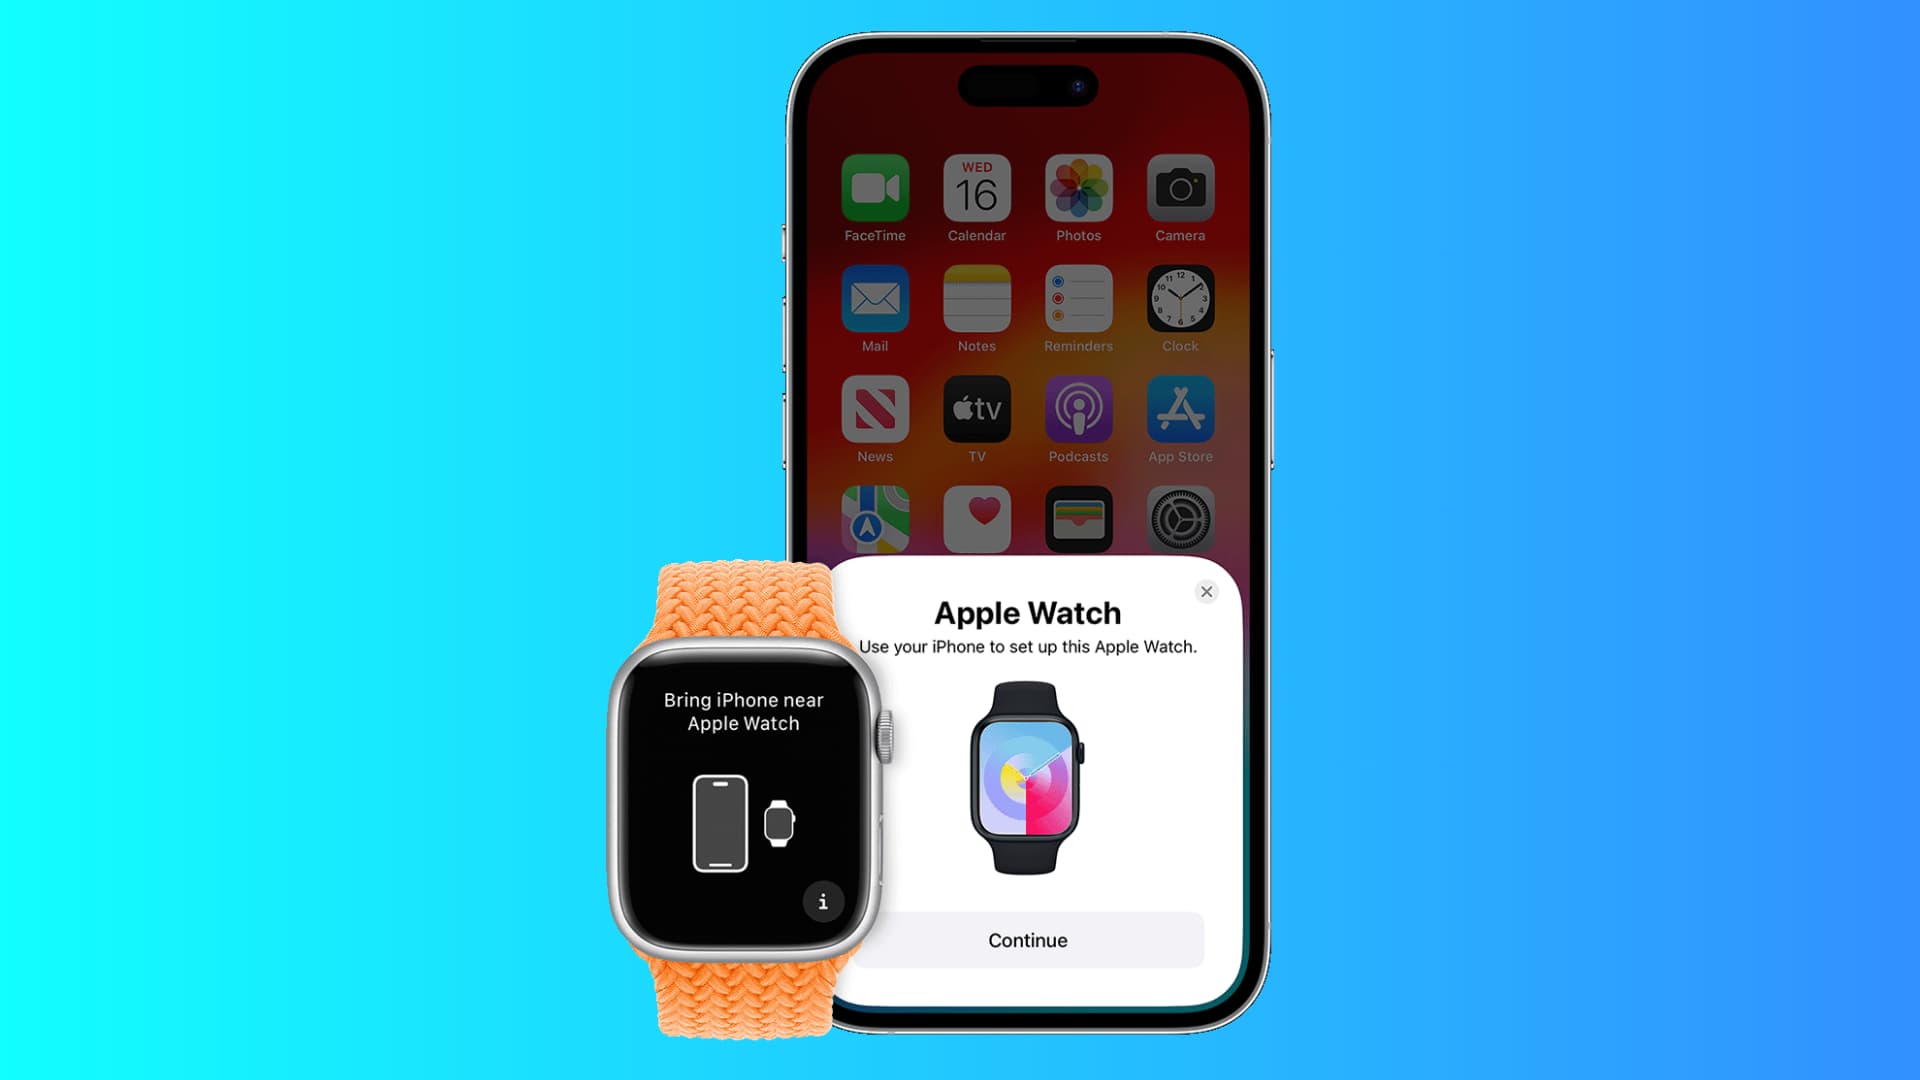 iPhone showing the Apple Watch setup prompt